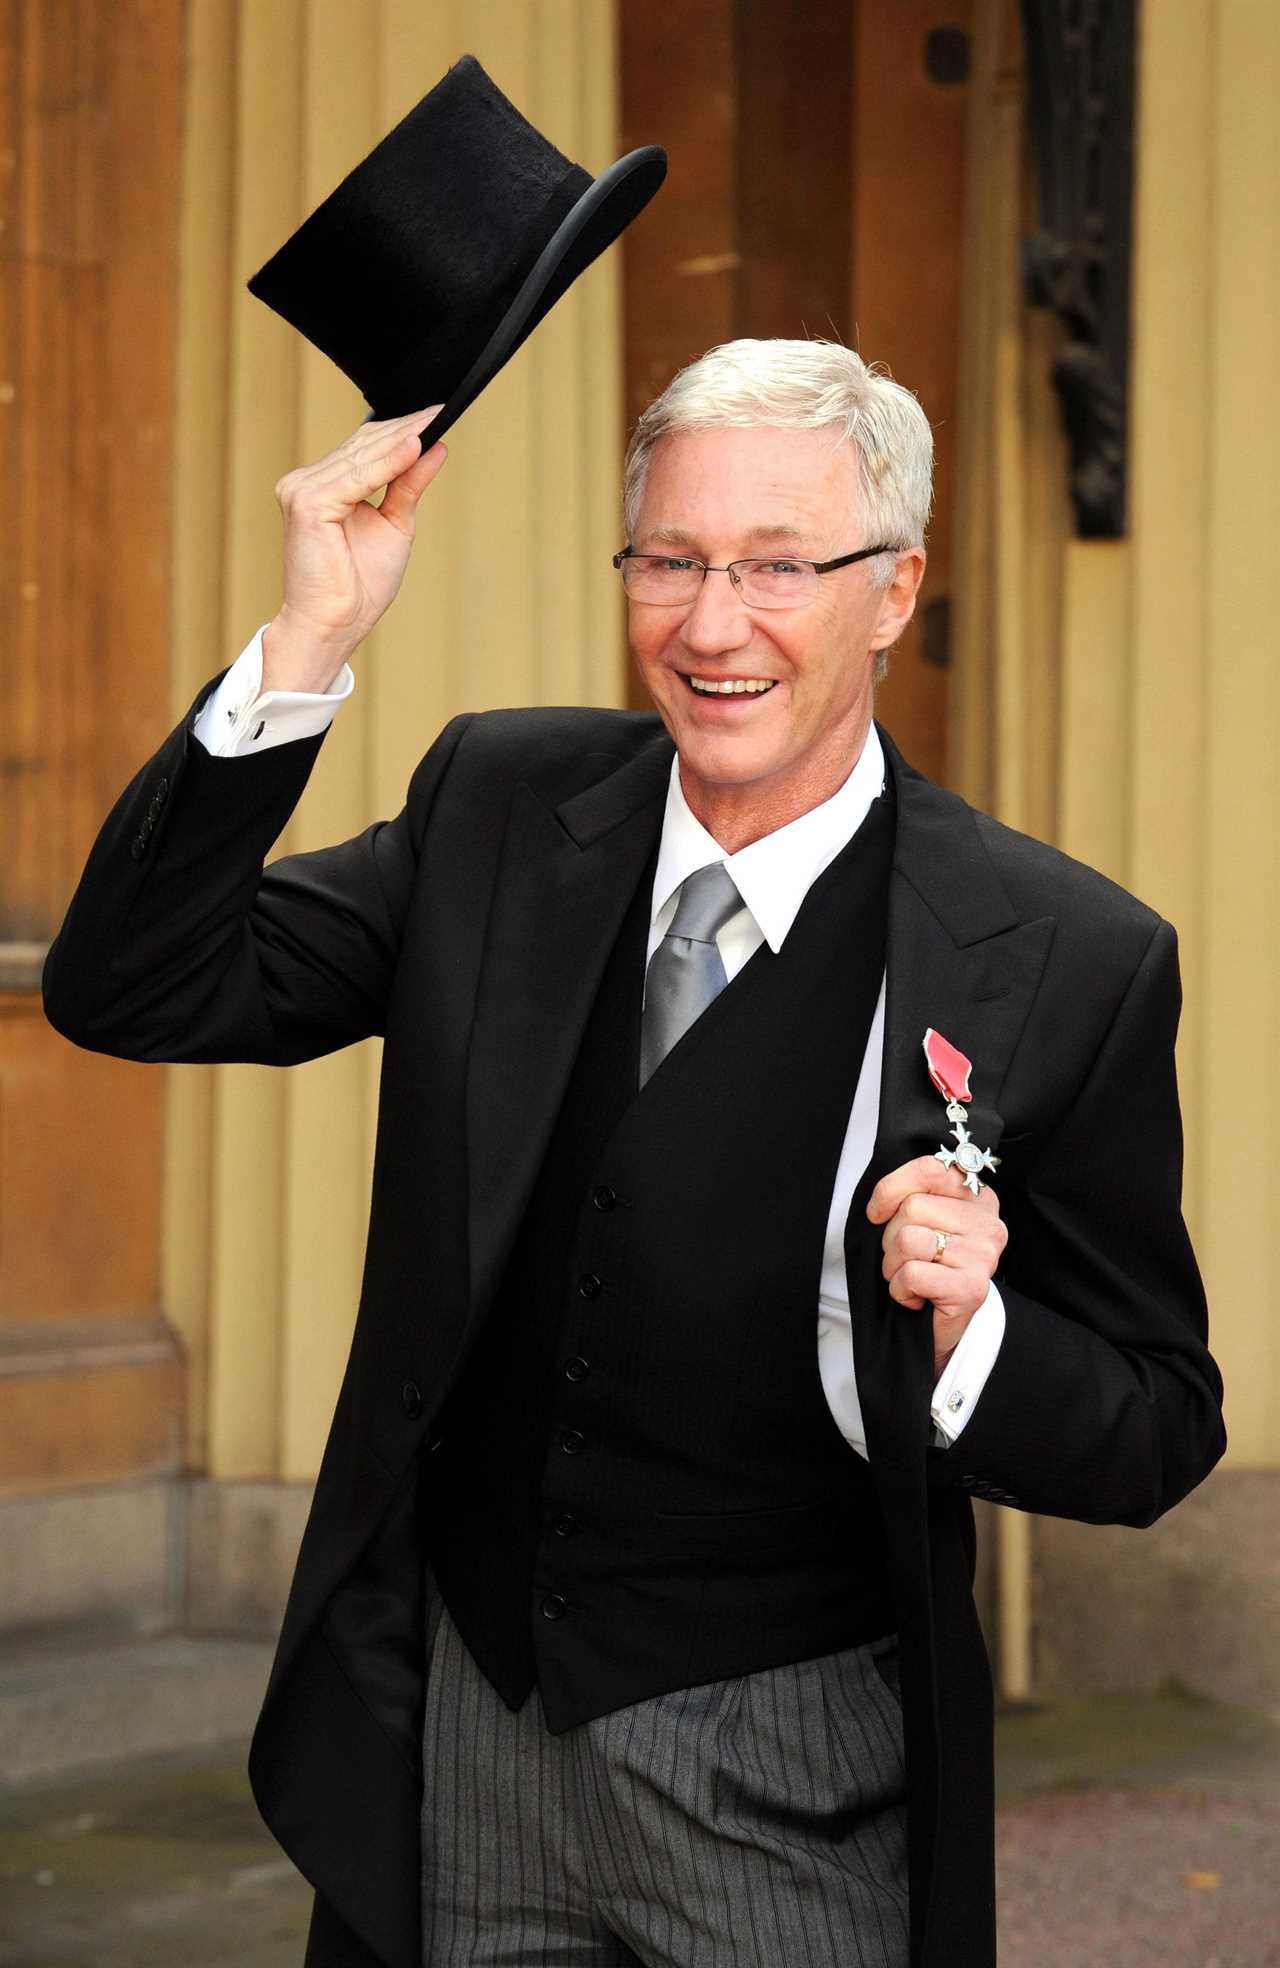 Paul O’Grady’s husband Andre shares final picture of them together on holiday before star’s shock death